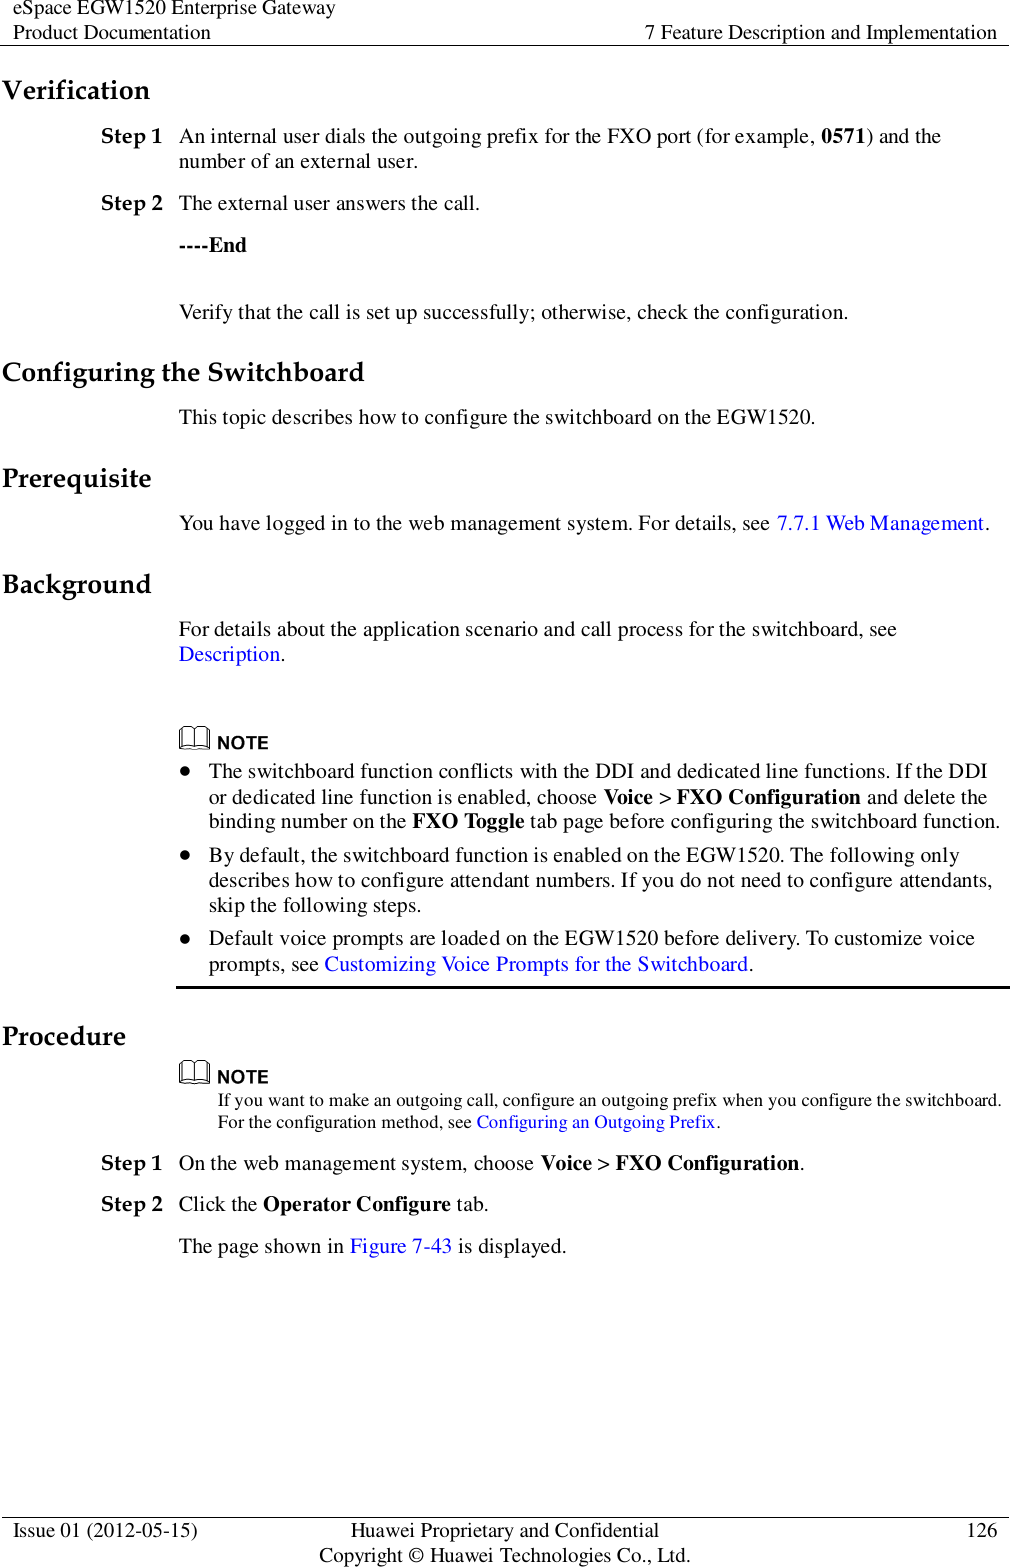 eSpace EGW1520 Enterprise Gateway Product Documentation 7 Feature Description and Implementation  Issue 01 (2012-05-15) Huawei Proprietary and Confidential                                     Copyright © Huawei Technologies Co., Ltd. 126  Verification Step 1 An internal user dials the outgoing prefix for the FXO port (for example, 0571) and the number of an external user. Step 2 The external user answers the call. ----End Verify that the call is set up successfully; otherwise, check the configuration. Configuring the Switchboard This topic describes how to configure the switchboard on the EGW1520. Prerequisite You have logged in to the web management system. For details, see 7.7.1 Web Management. Background For details about the application scenario and call process for the switchboard, see Description.    The switchboard function conflicts with the DDI and dedicated line functions. If the DDI or dedicated line function is enabled, choose Voice &gt; FXO Configuration and delete the binding number on the FXO Toggle tab page before configuring the switchboard function.  By default, the switchboard function is enabled on the EGW1520. The following only describes how to configure attendant numbers. If you do not need to configure attendants, skip the following steps.  Default voice prompts are loaded on the EGW1520 before delivery. To customize voice prompts, see Customizing Voice Prompts for the Switchboard. Procedure  If you want to make an outgoing call, configure an outgoing prefix when you configure the switchboard. For the configuration method, see Configuring an Outgoing Prefix. Step 1 On the web management system, choose Voice &gt; FXO Configuration. Step 2 Click the Operator Configure tab. The page shown in Figure 7-43 is displayed. 